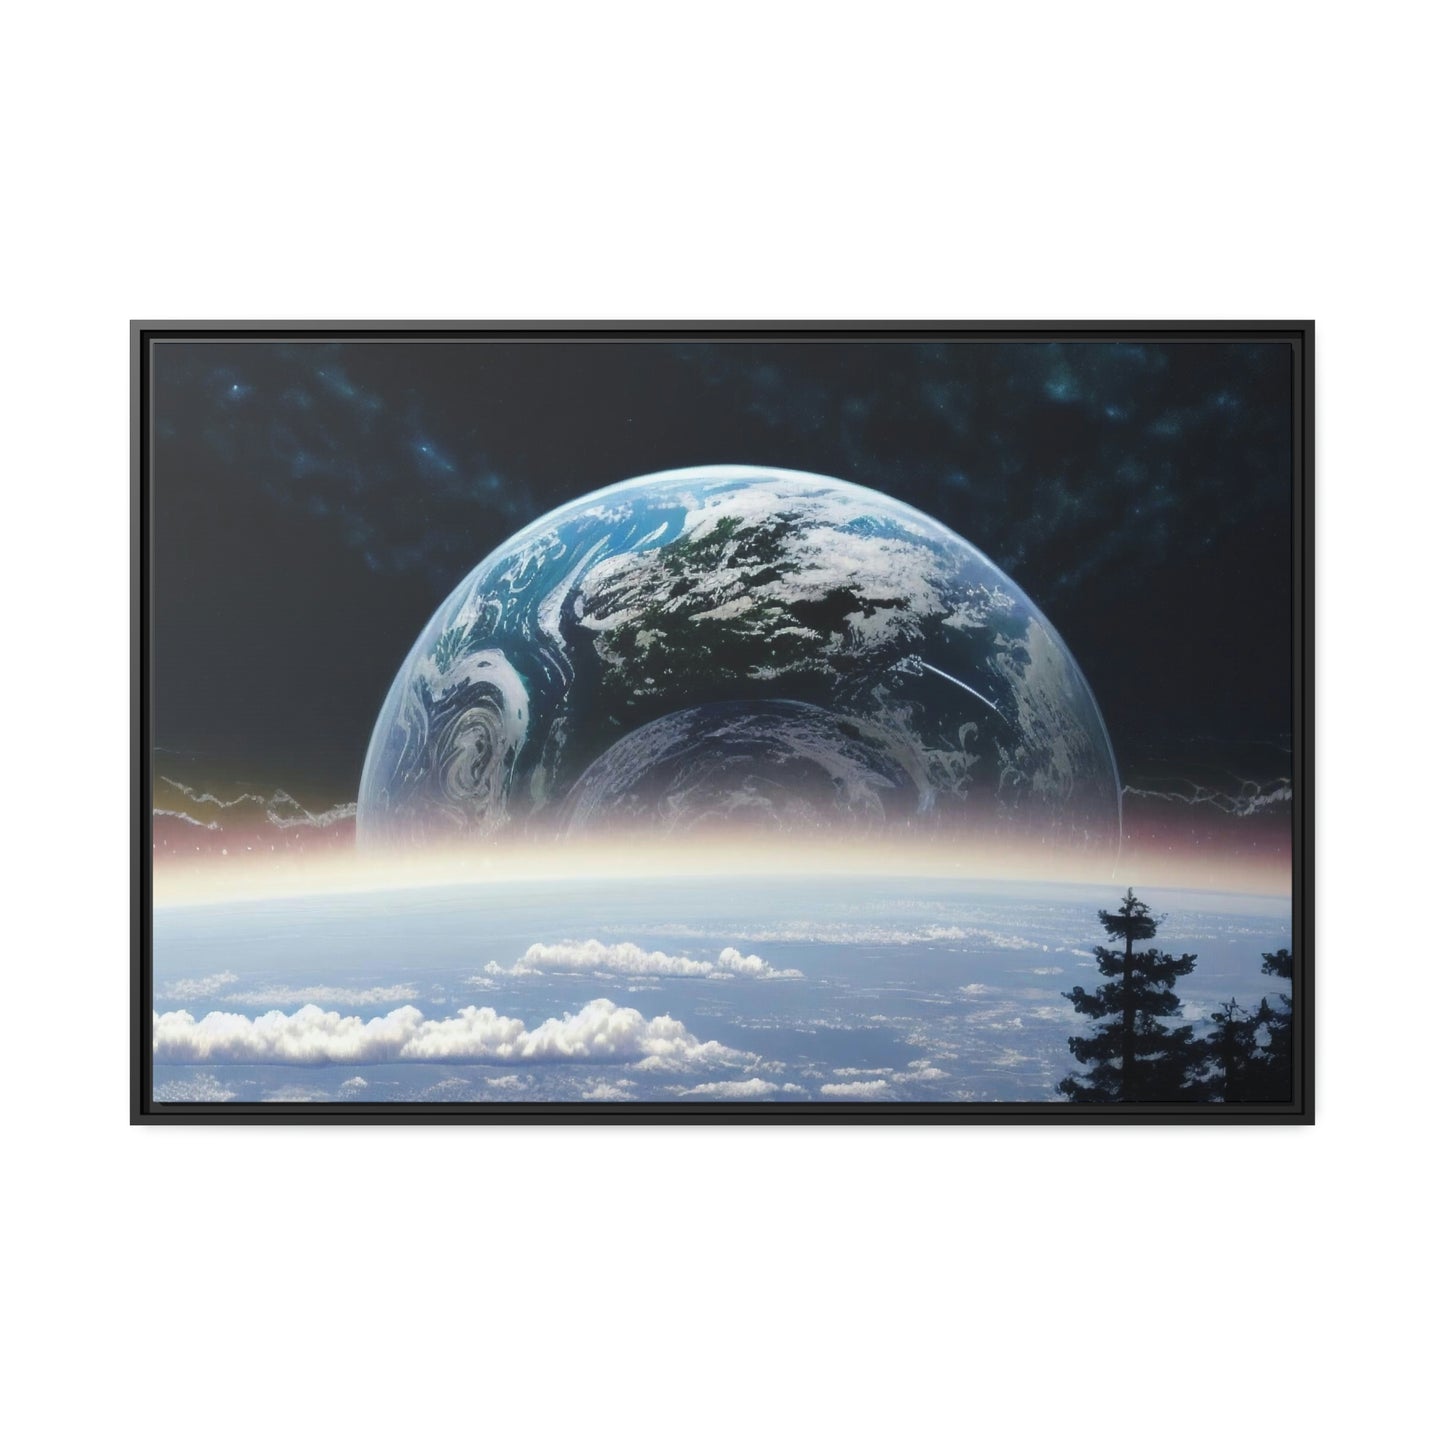 Earth From A Nearby Planet - Gallery Grade Canvas In Floater Frame